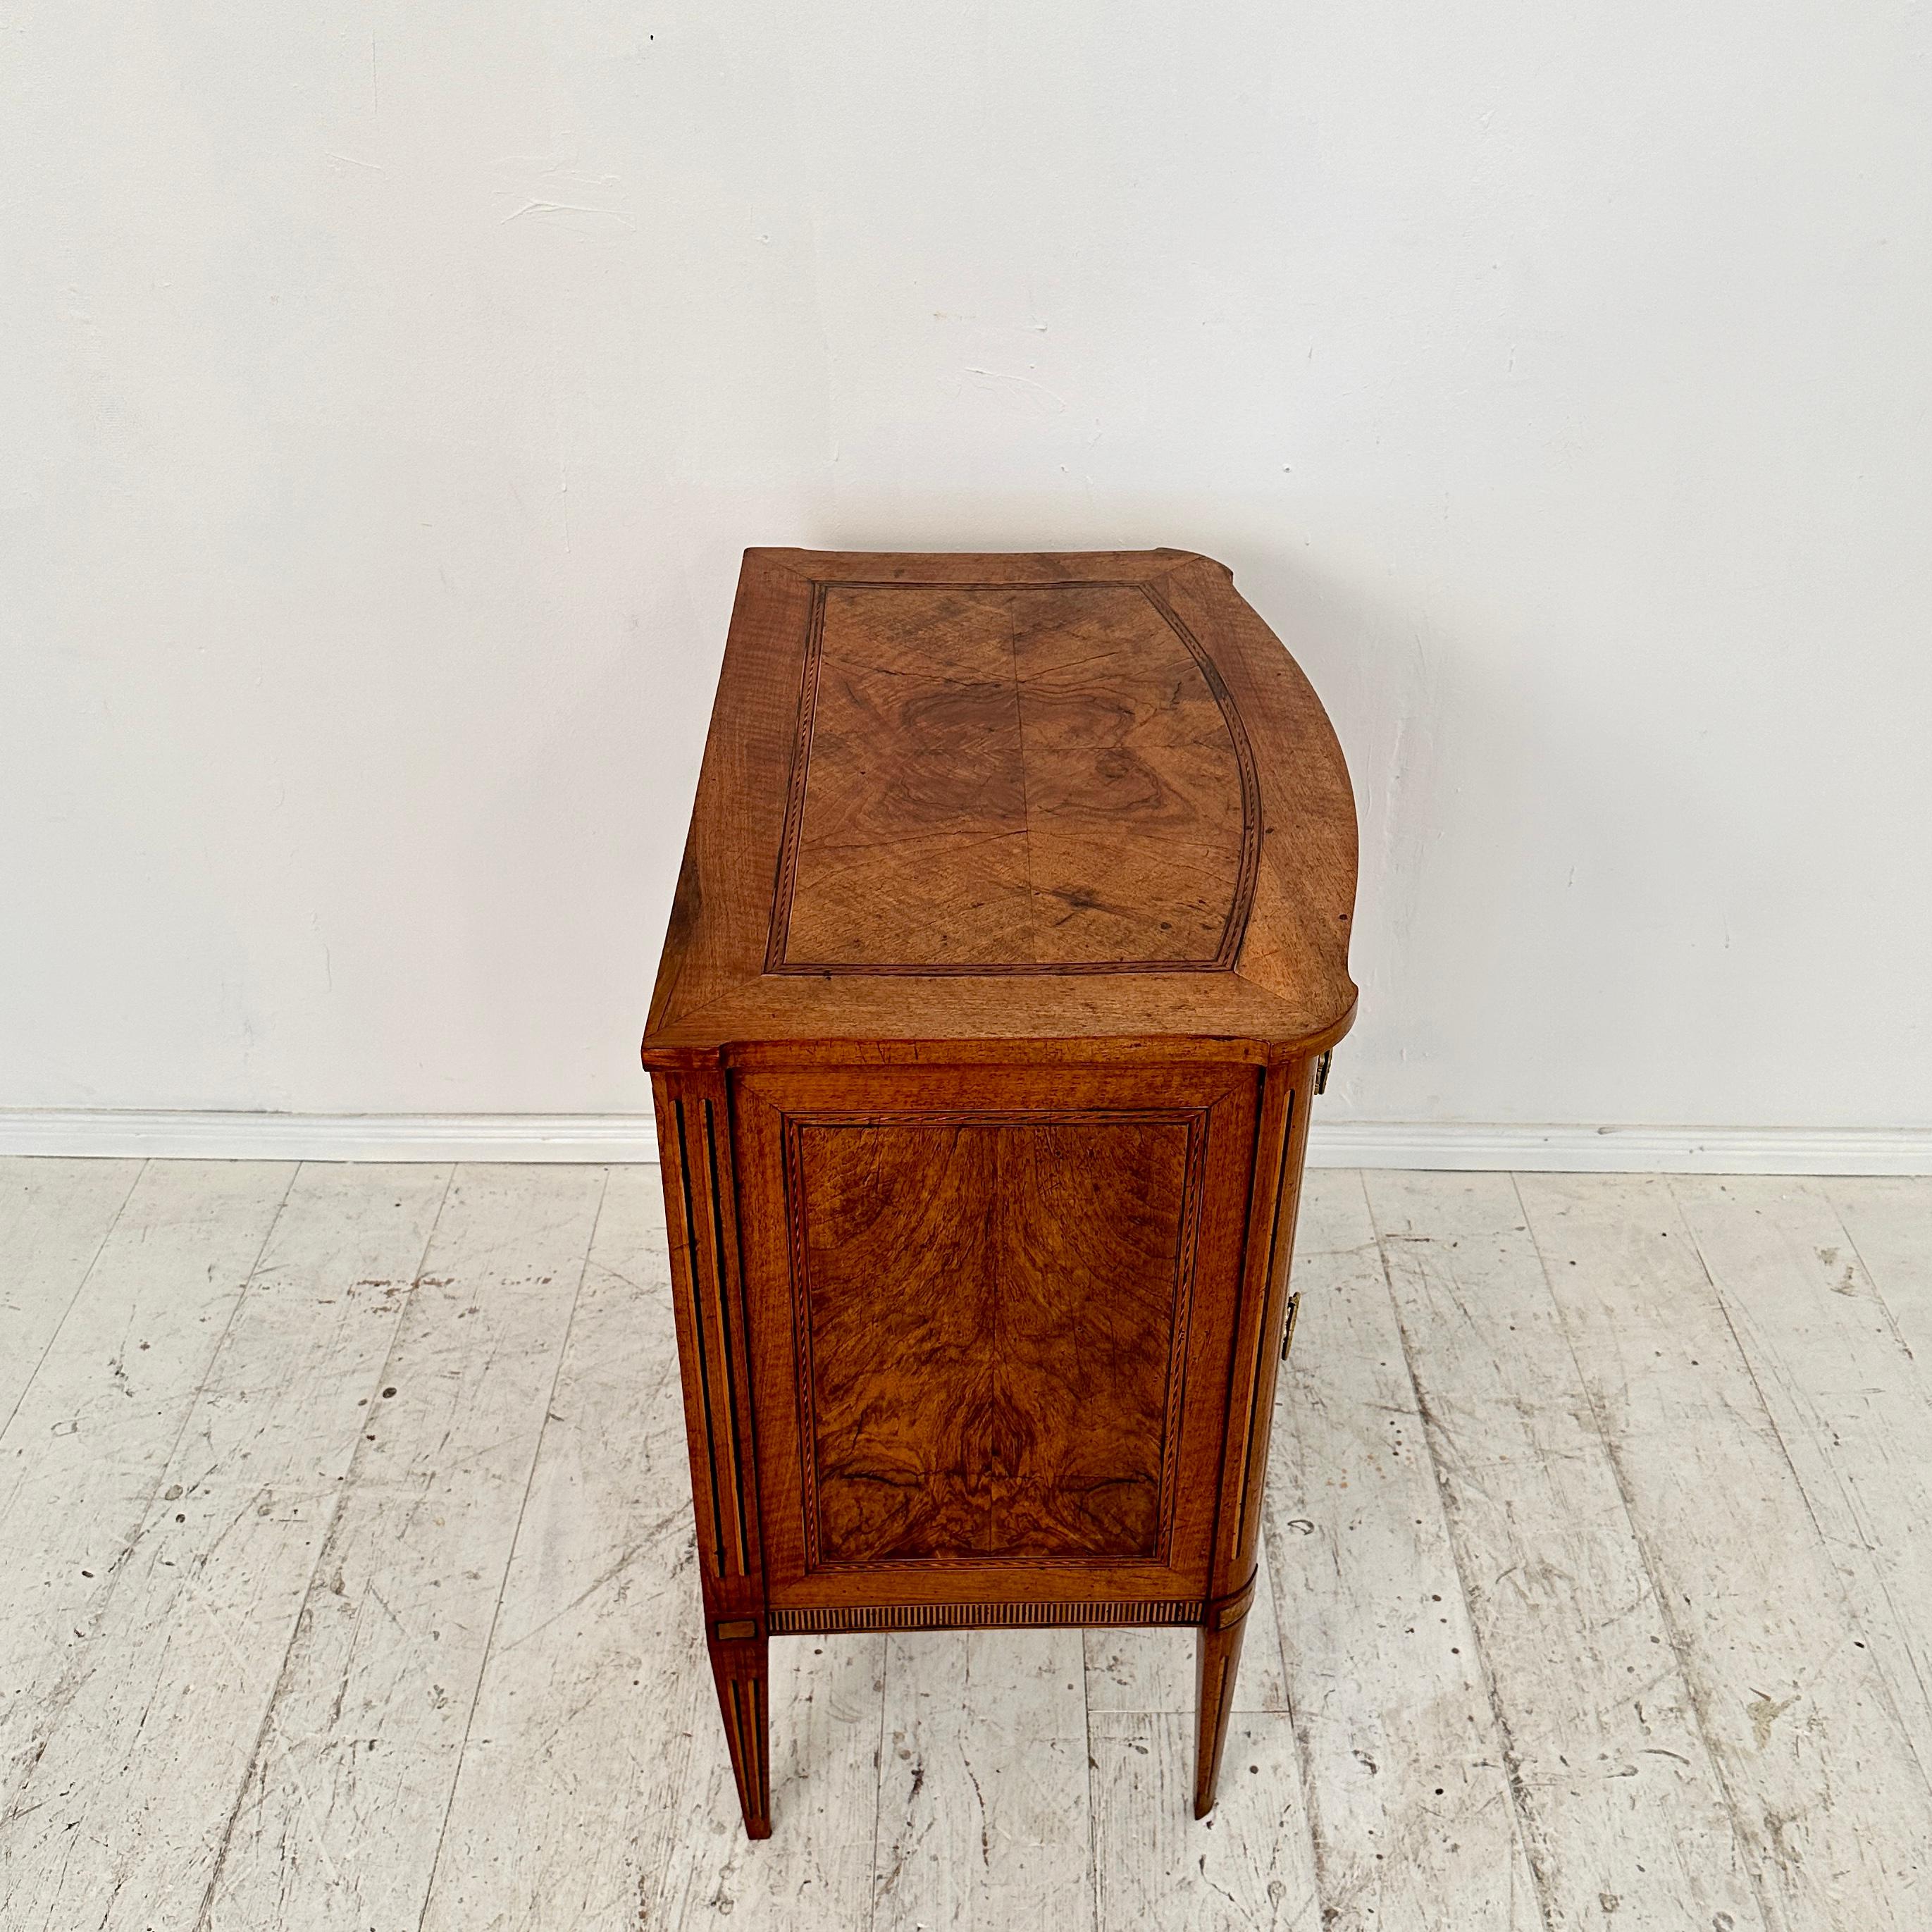 Small 18th Century German Louis Seize Commode in Walnut with 2 Drawers, 1790 For Sale 4